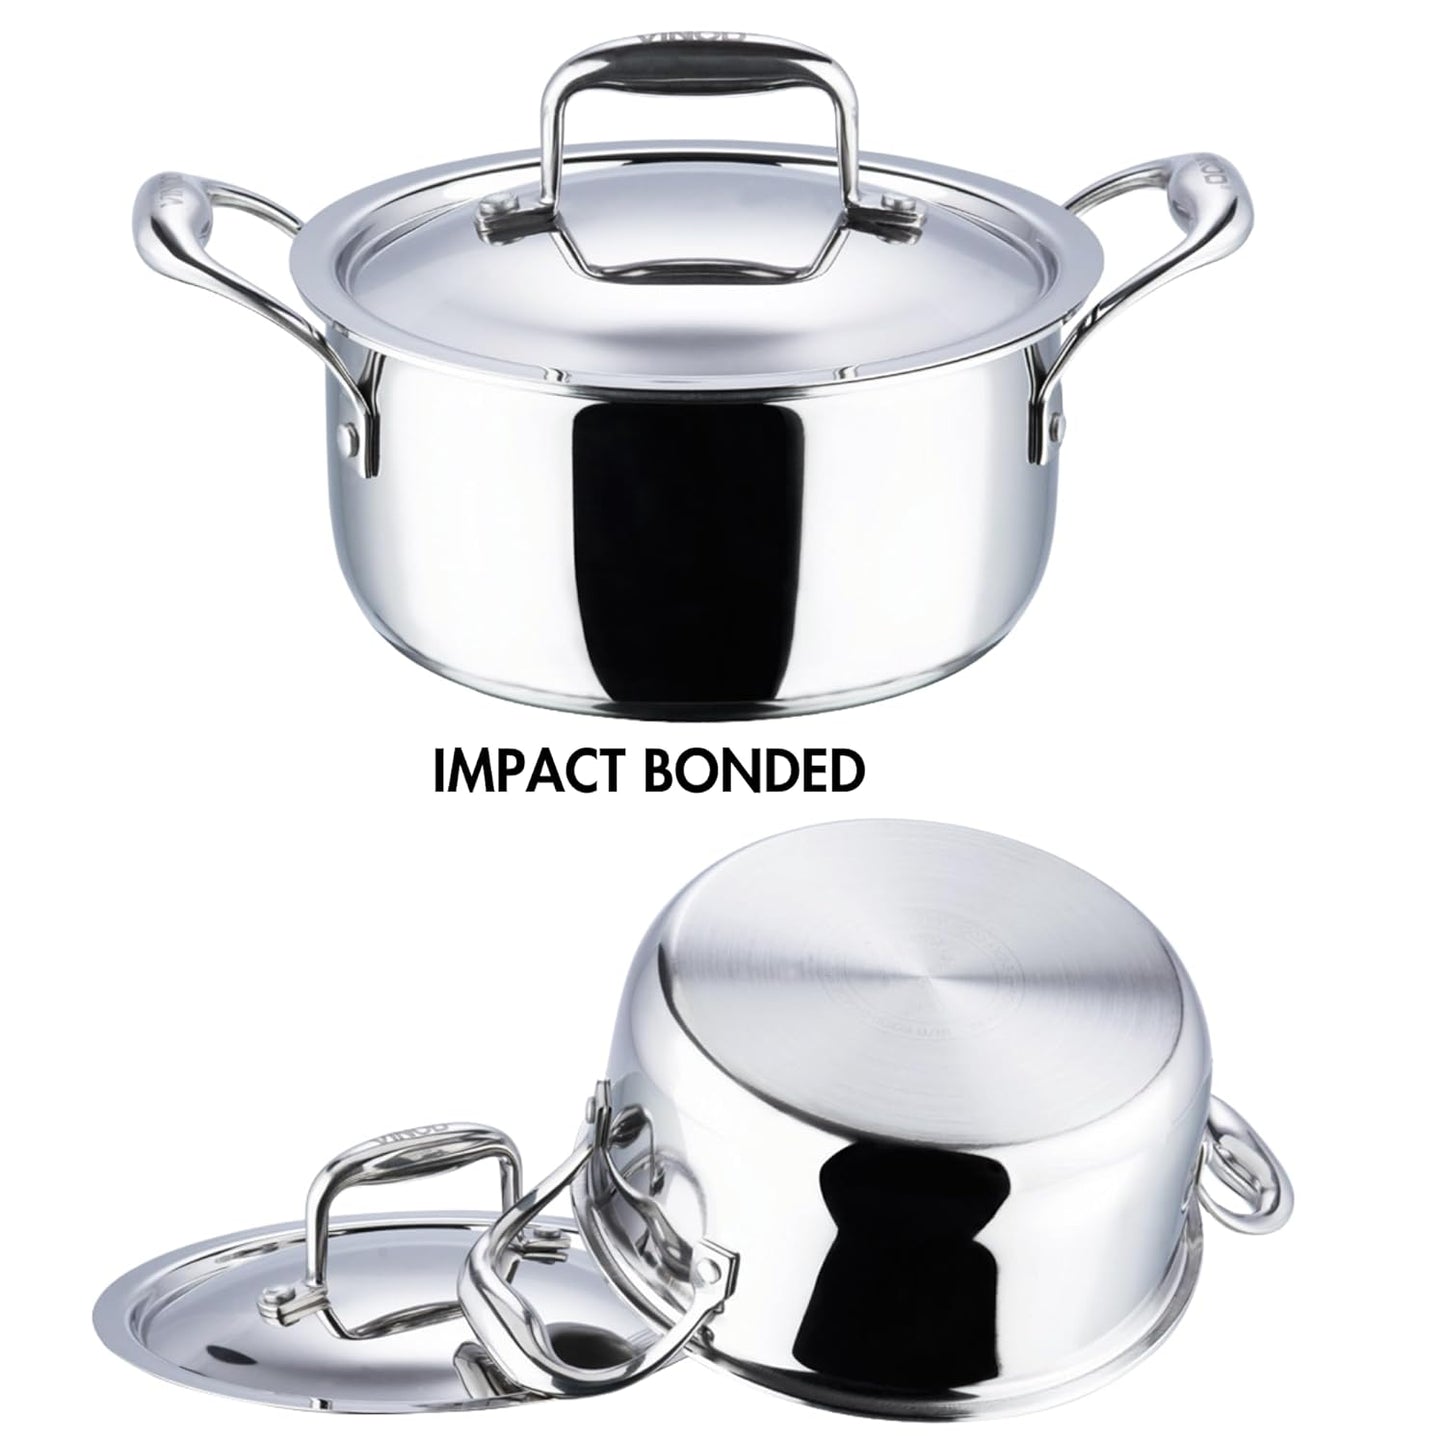 Stainless Steel Saucepot with Lid - 3 litre or 5 litre Cookware pot cooking pot with lid